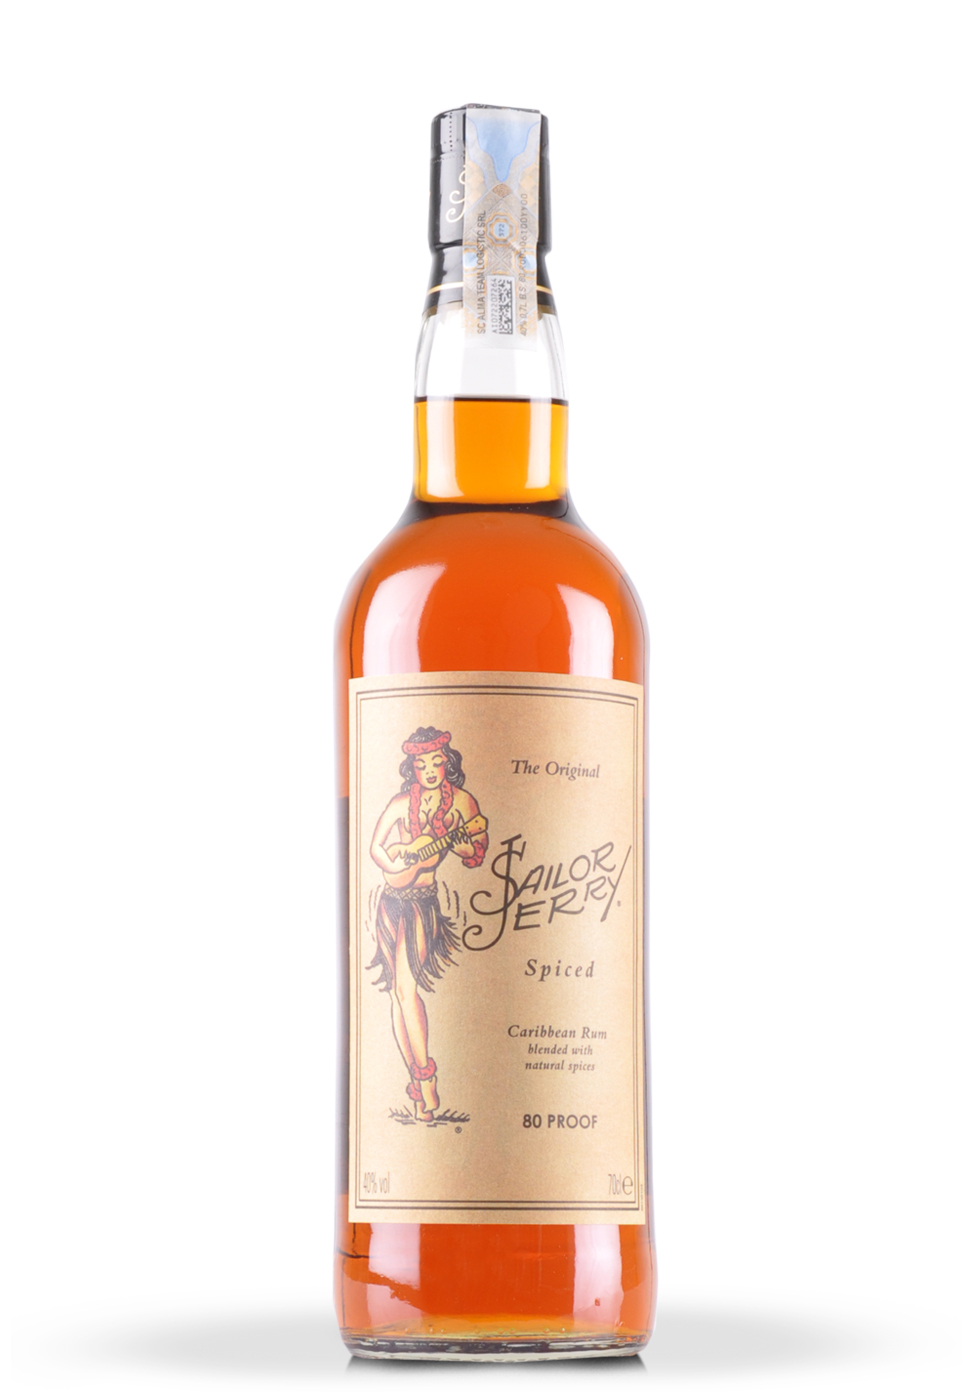 Rom Sailor Jerry Spiced (0.7L) Image